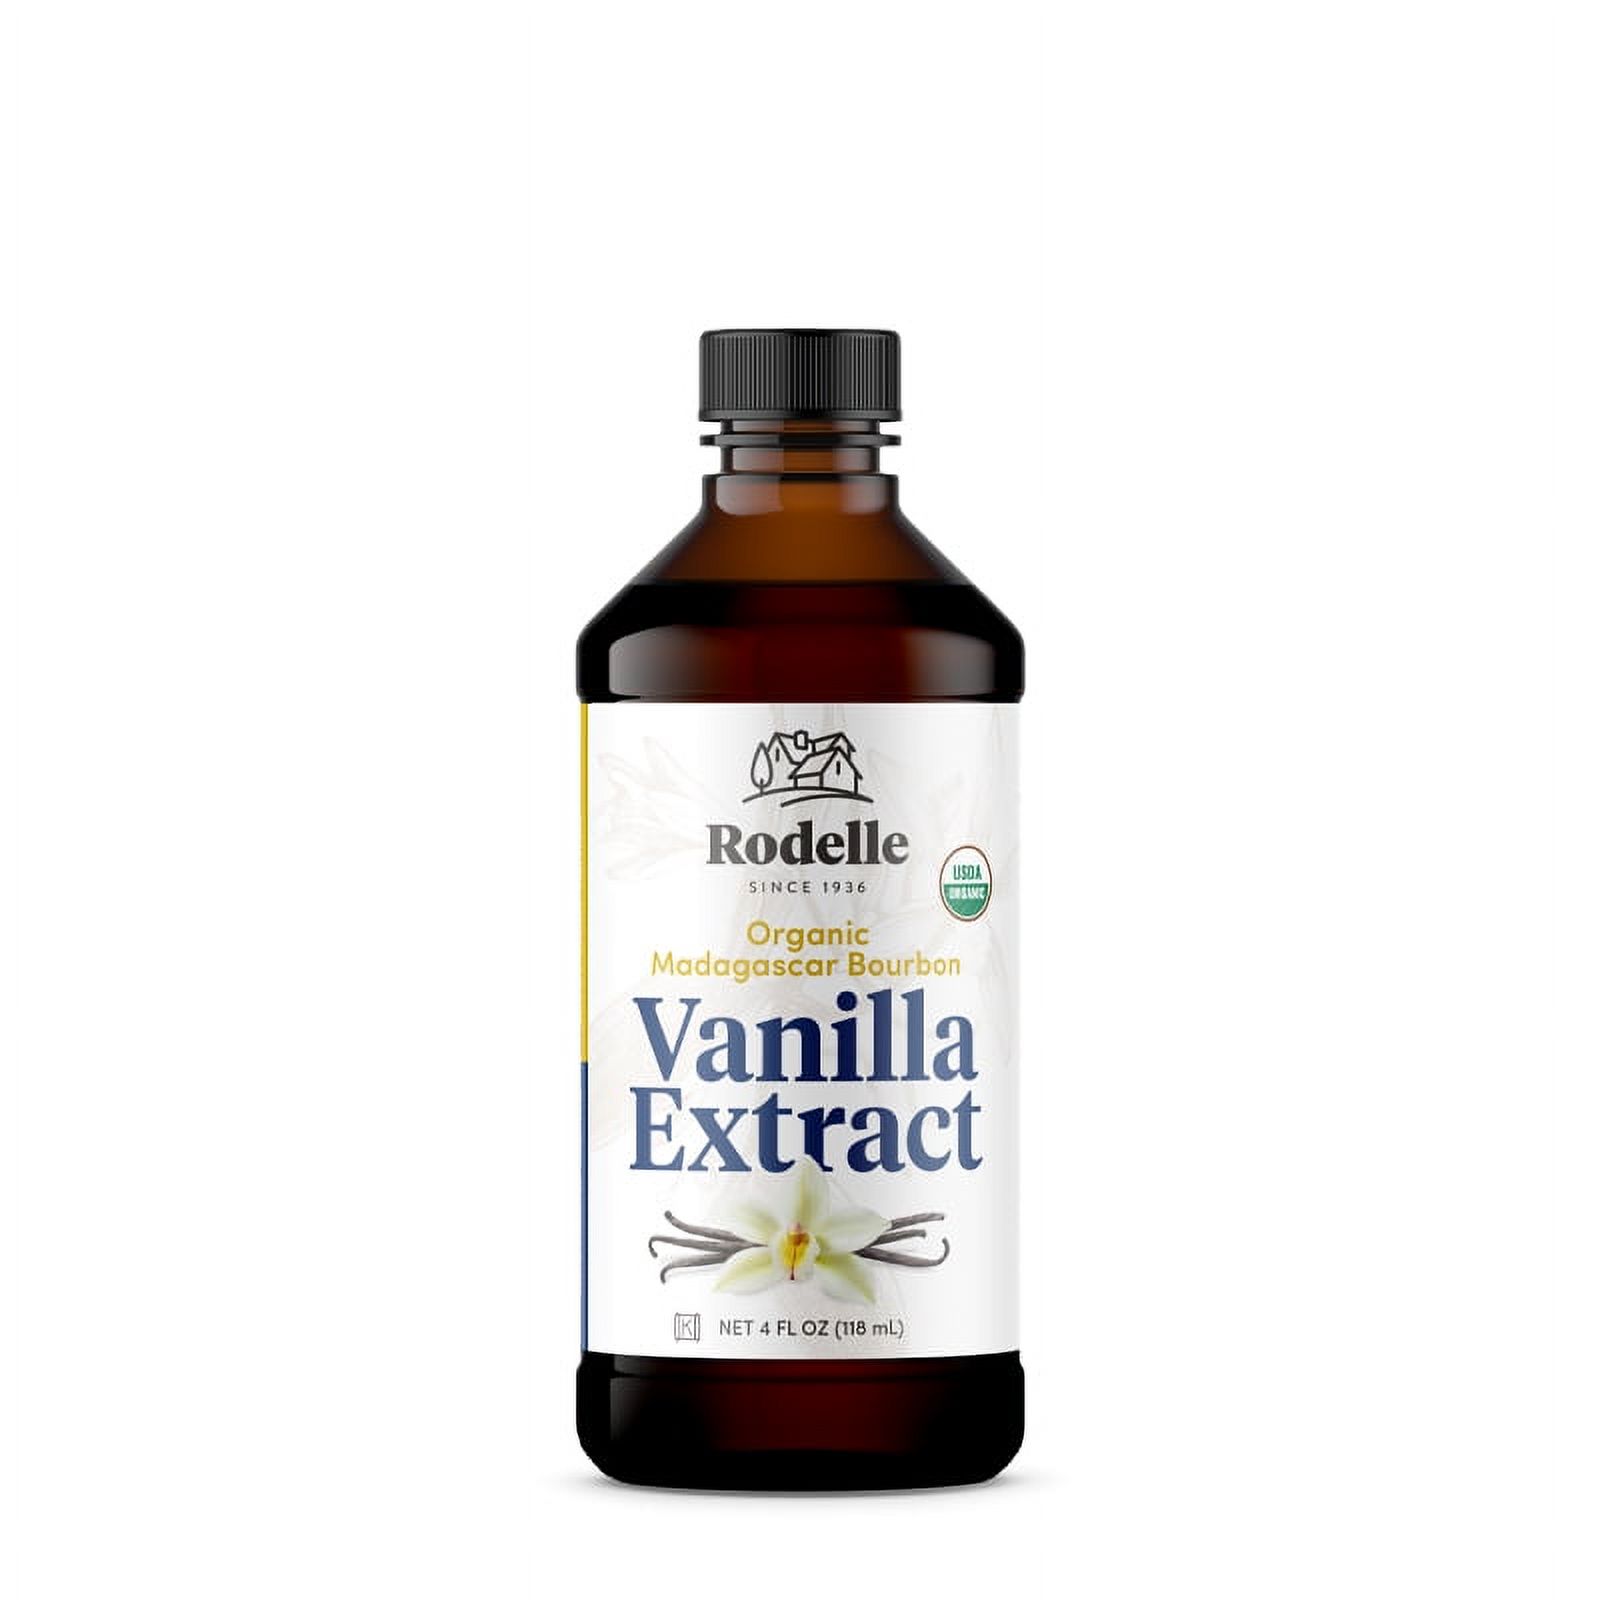 Rodelle Organic Pure Vanilla Extract 4 fl oz, Baking Extracts - image 1 of 6